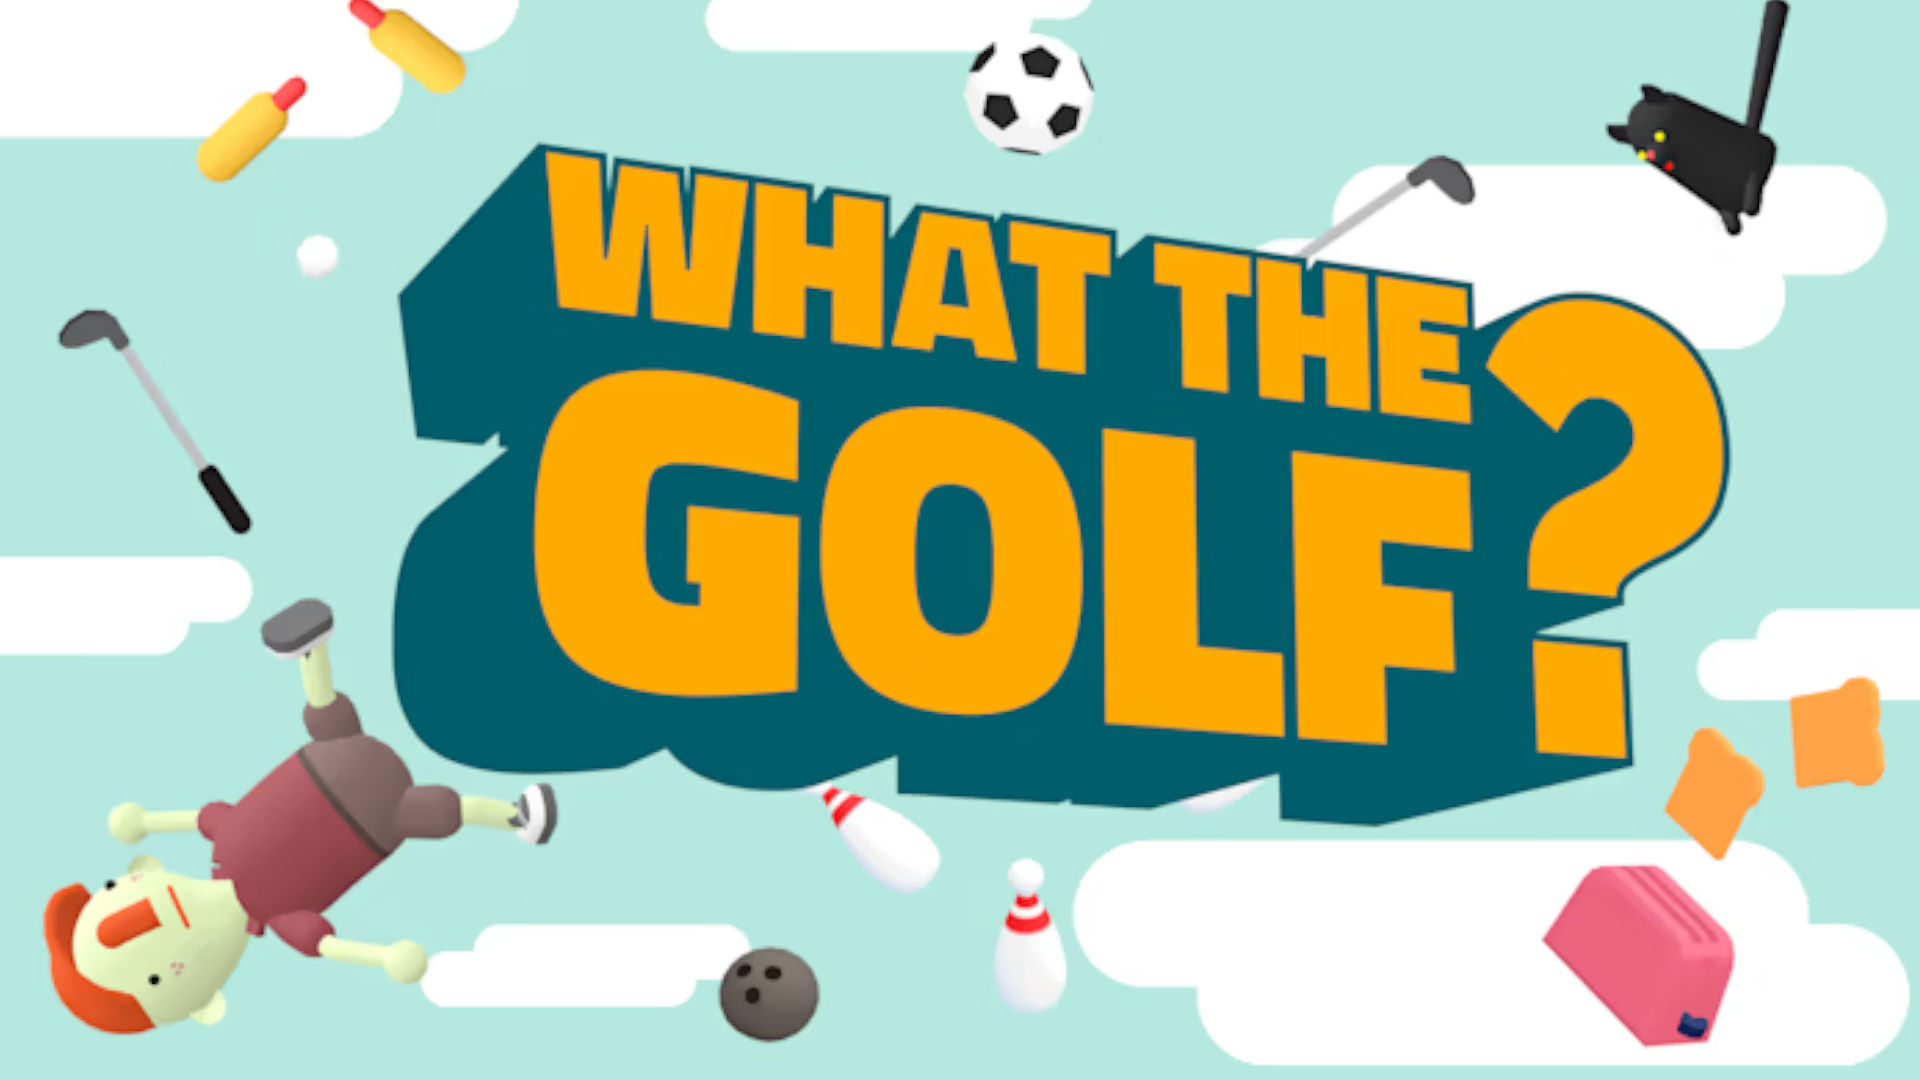 Cover art for What the Golf? one of the wackier golf games